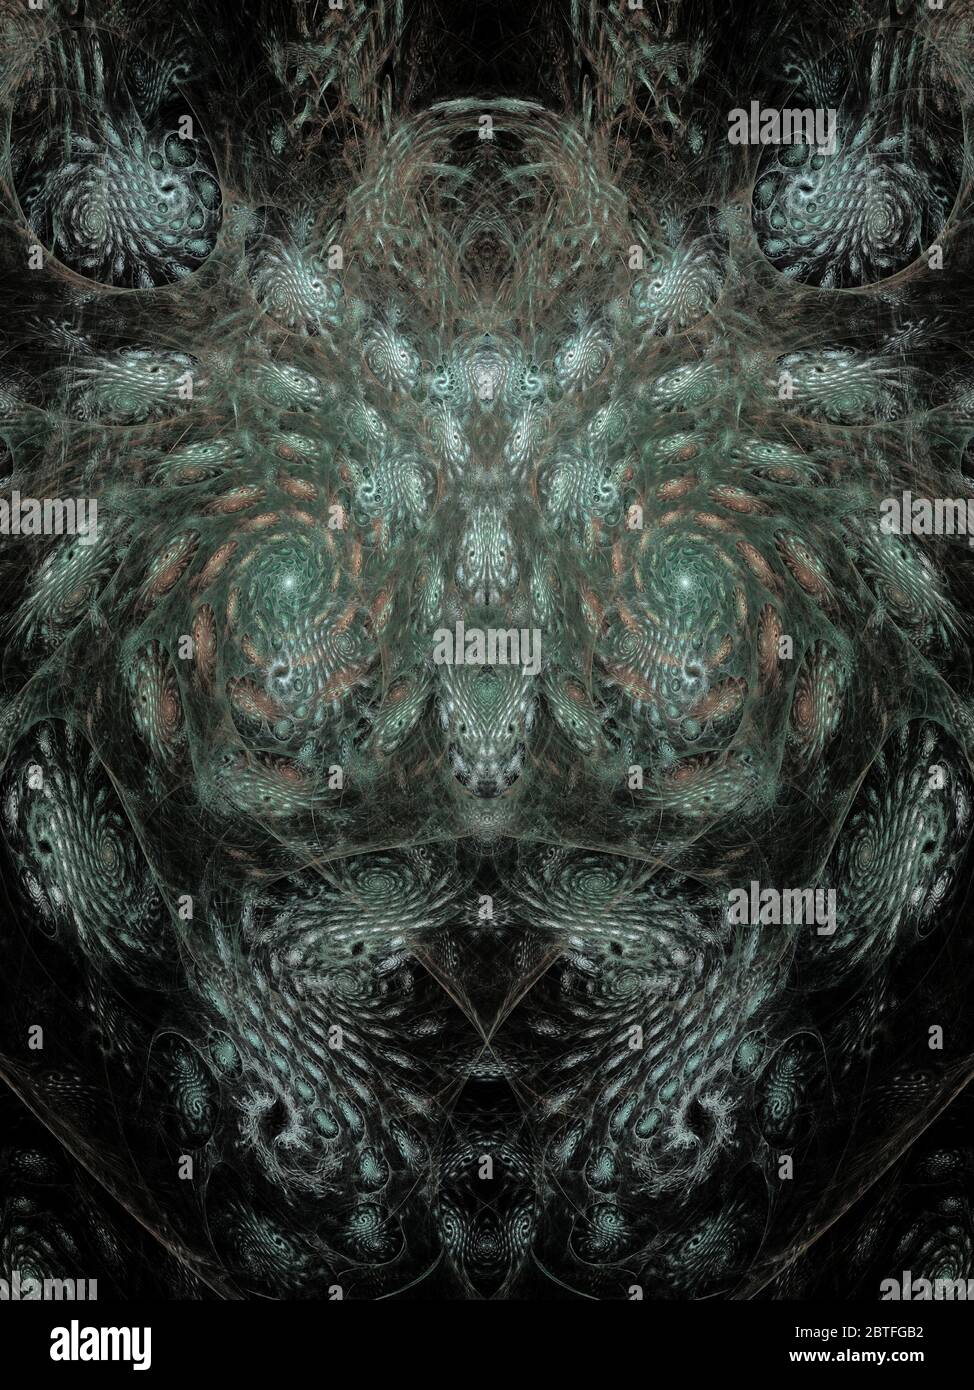 Abstract Grey Owl Flame Fractal Design Stock Photo